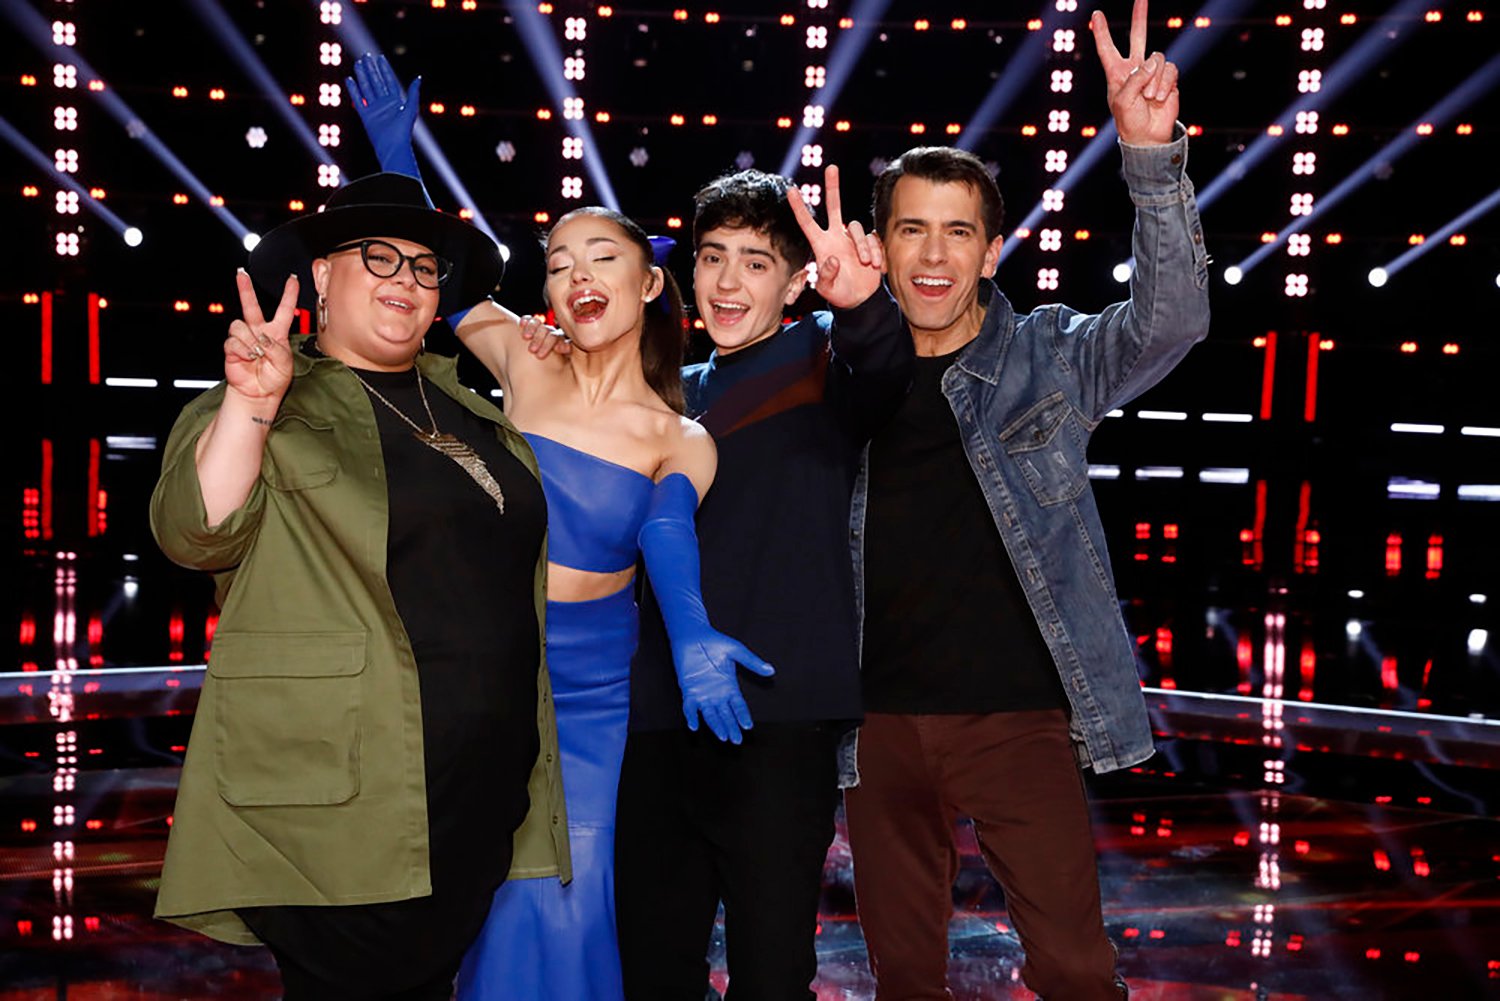 Holly Forbes, Ariana Grande, Jim and Sasha Allen of Team Ariana on The Voice